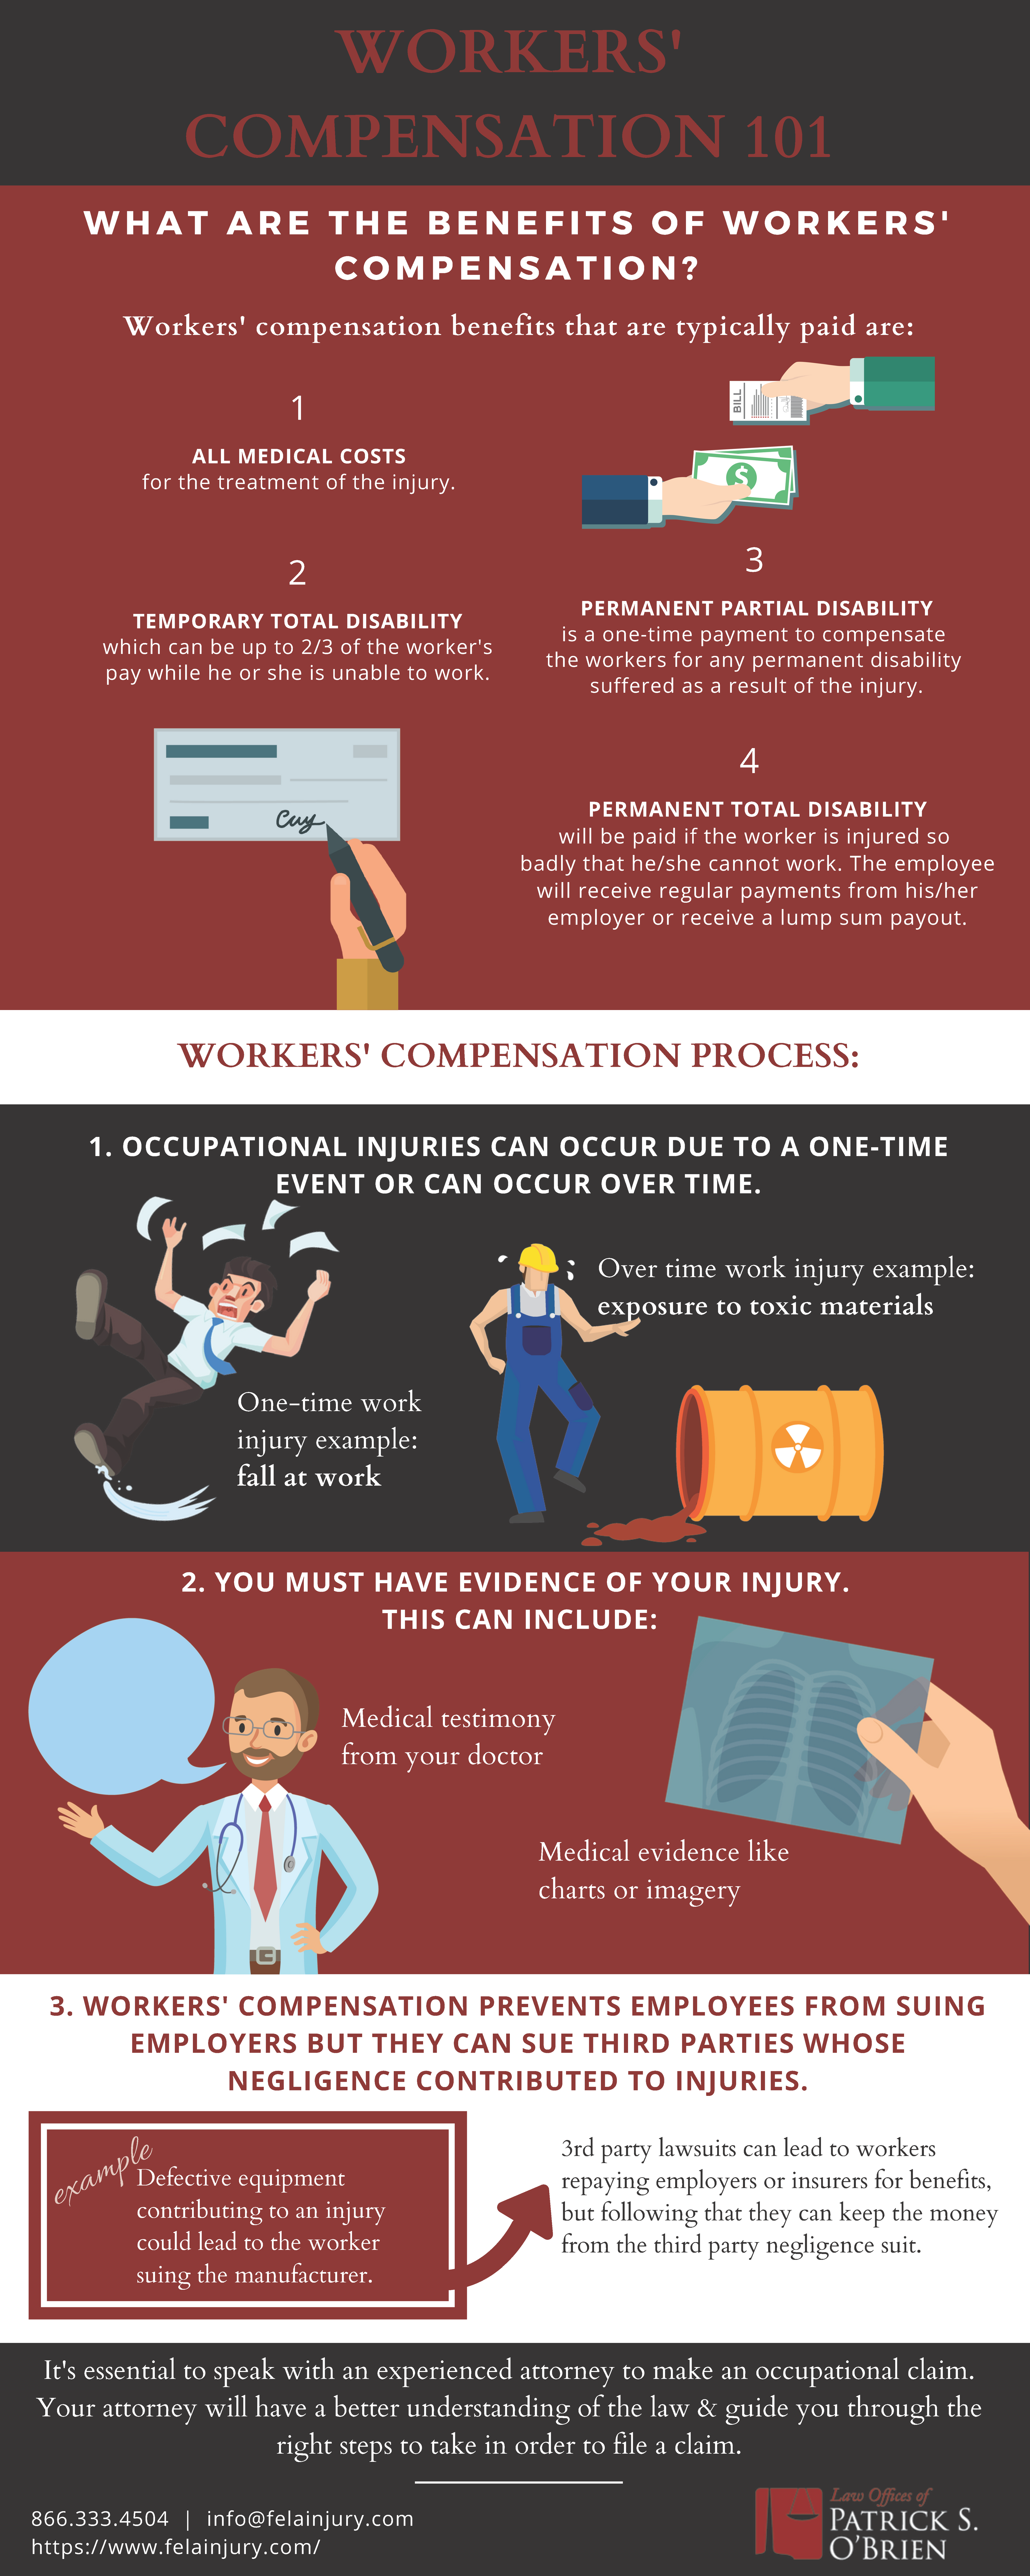 patrick obrien workers compensation 101 infographic